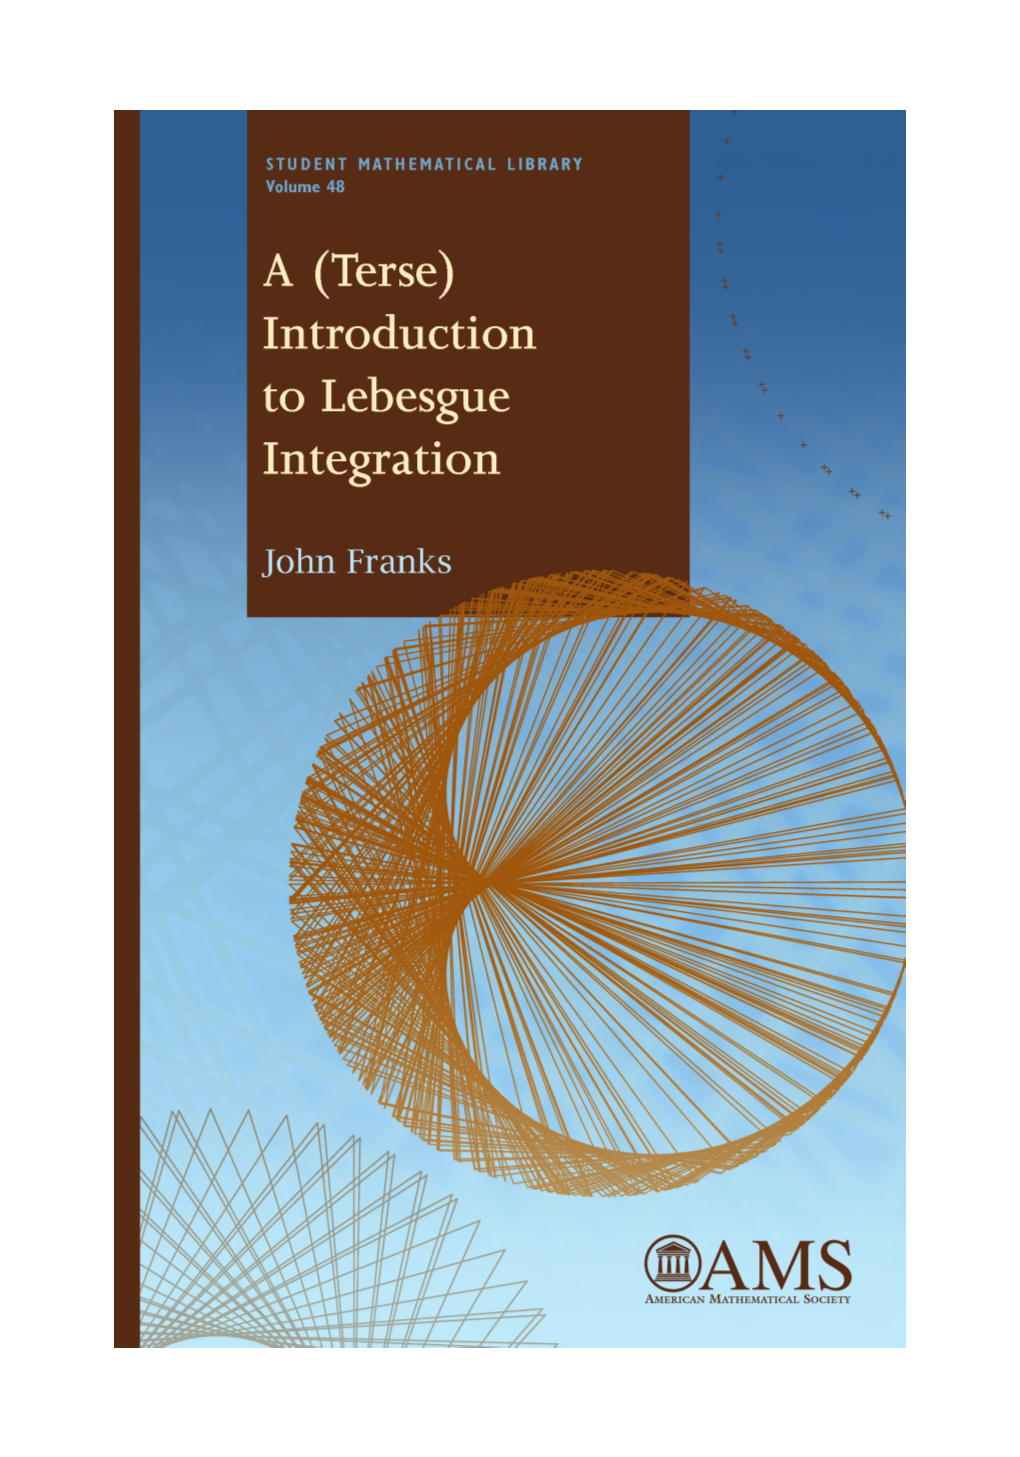 (Terse) Introduction to Lebesgue Integration